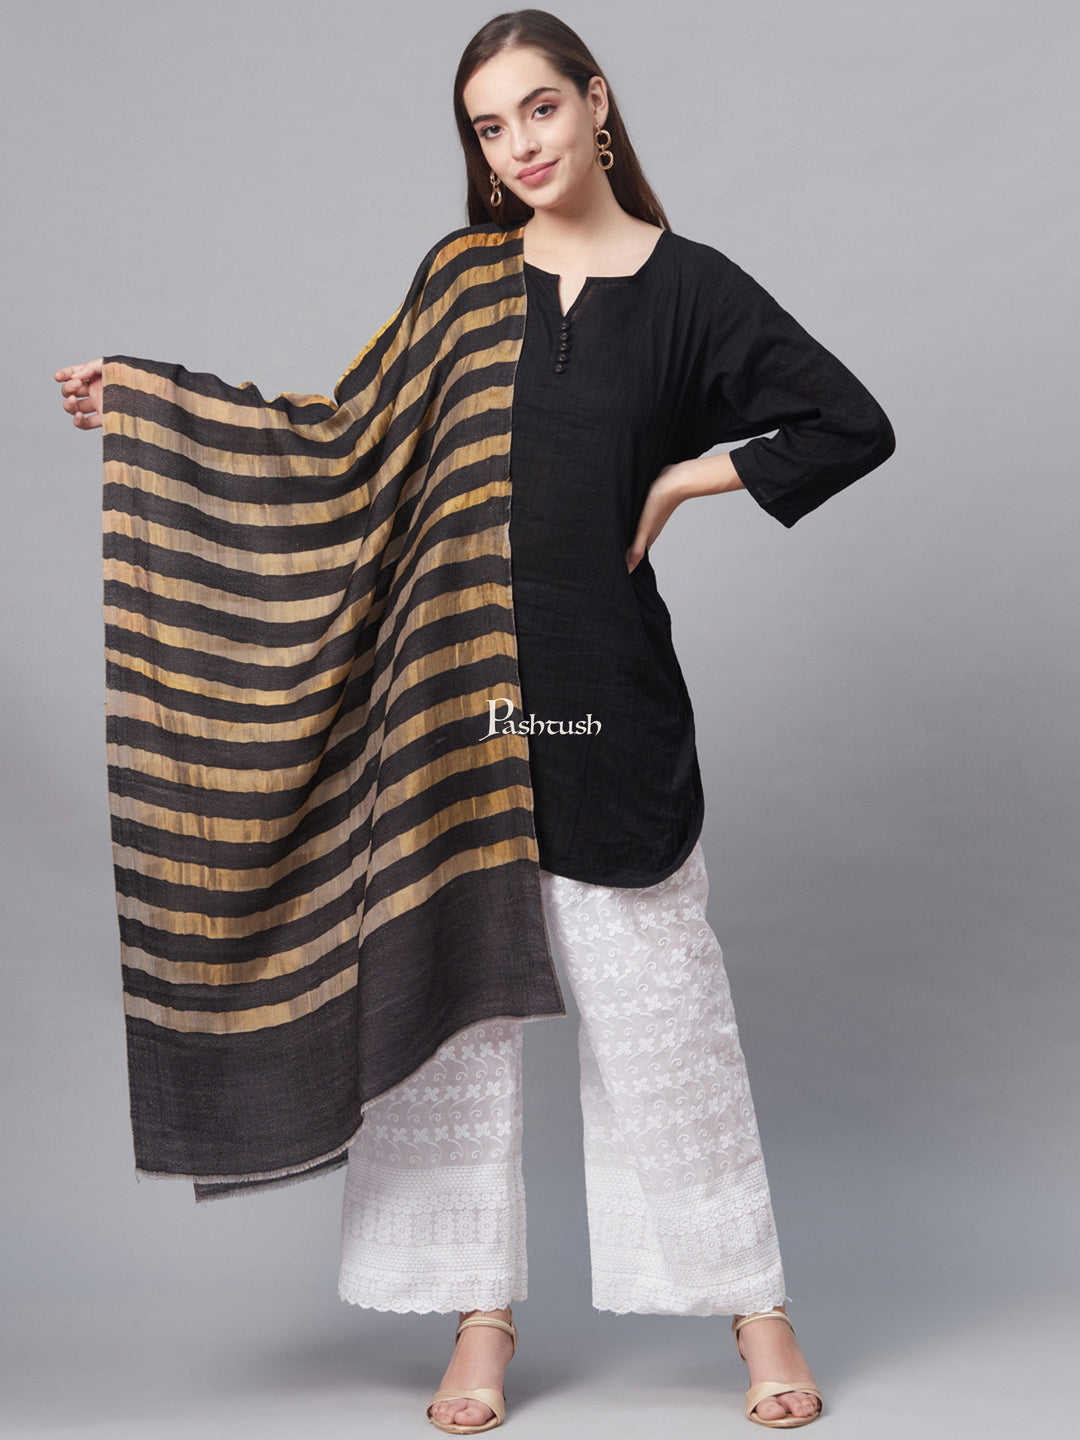 Pashtush India Womens Stoles and Scarves Scarf Pashtush Womens, Extra Fine Wool, Twilight Striped Scarf, With Shimmery Metallic Zari Thread Weave Black